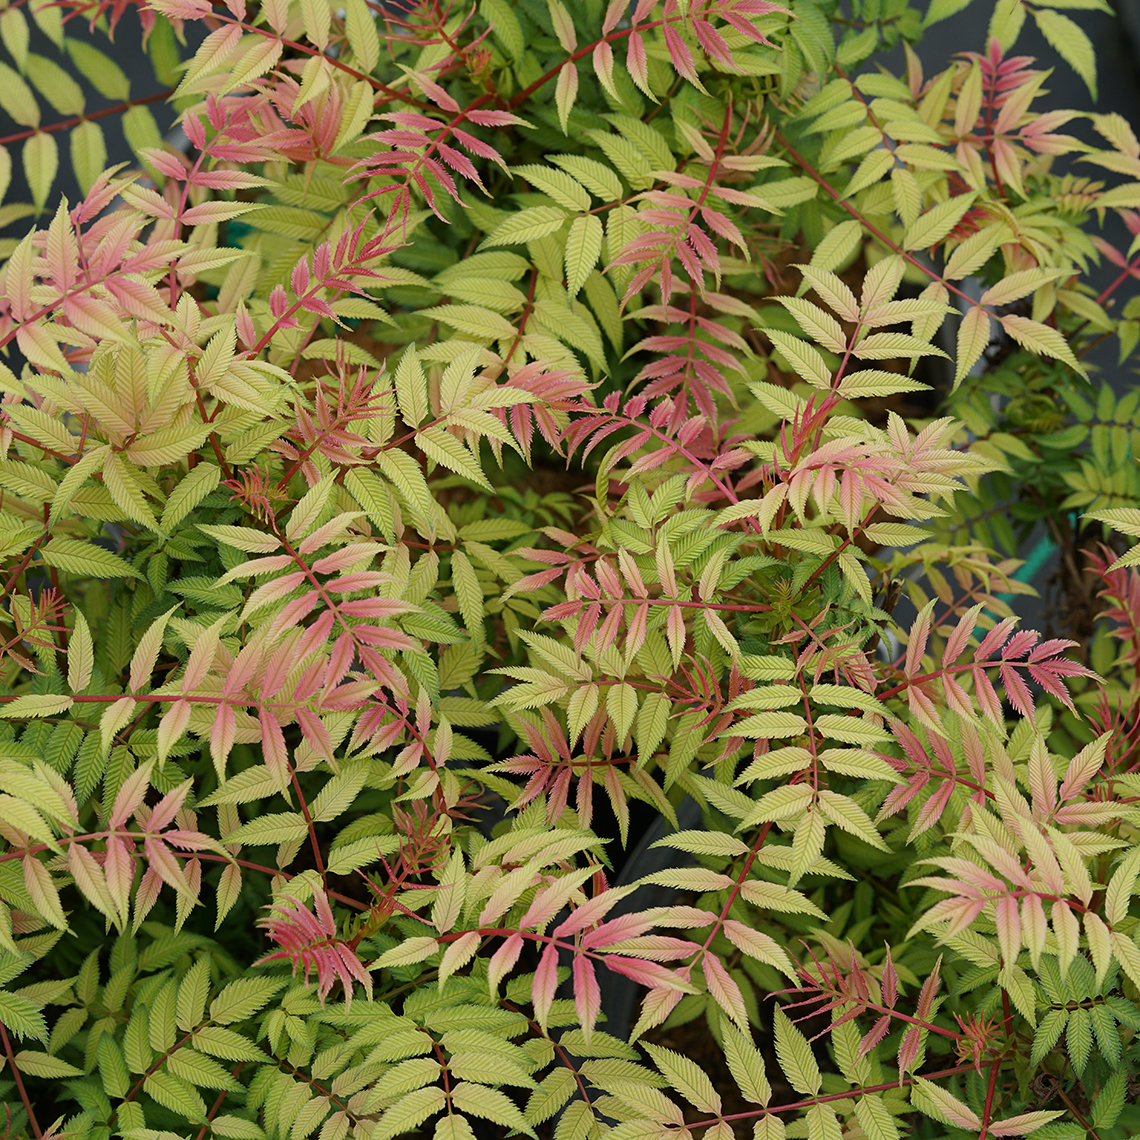 Sorbaria Mr.Mustard in spring with pink, red, yellow, orange, and green foliage.